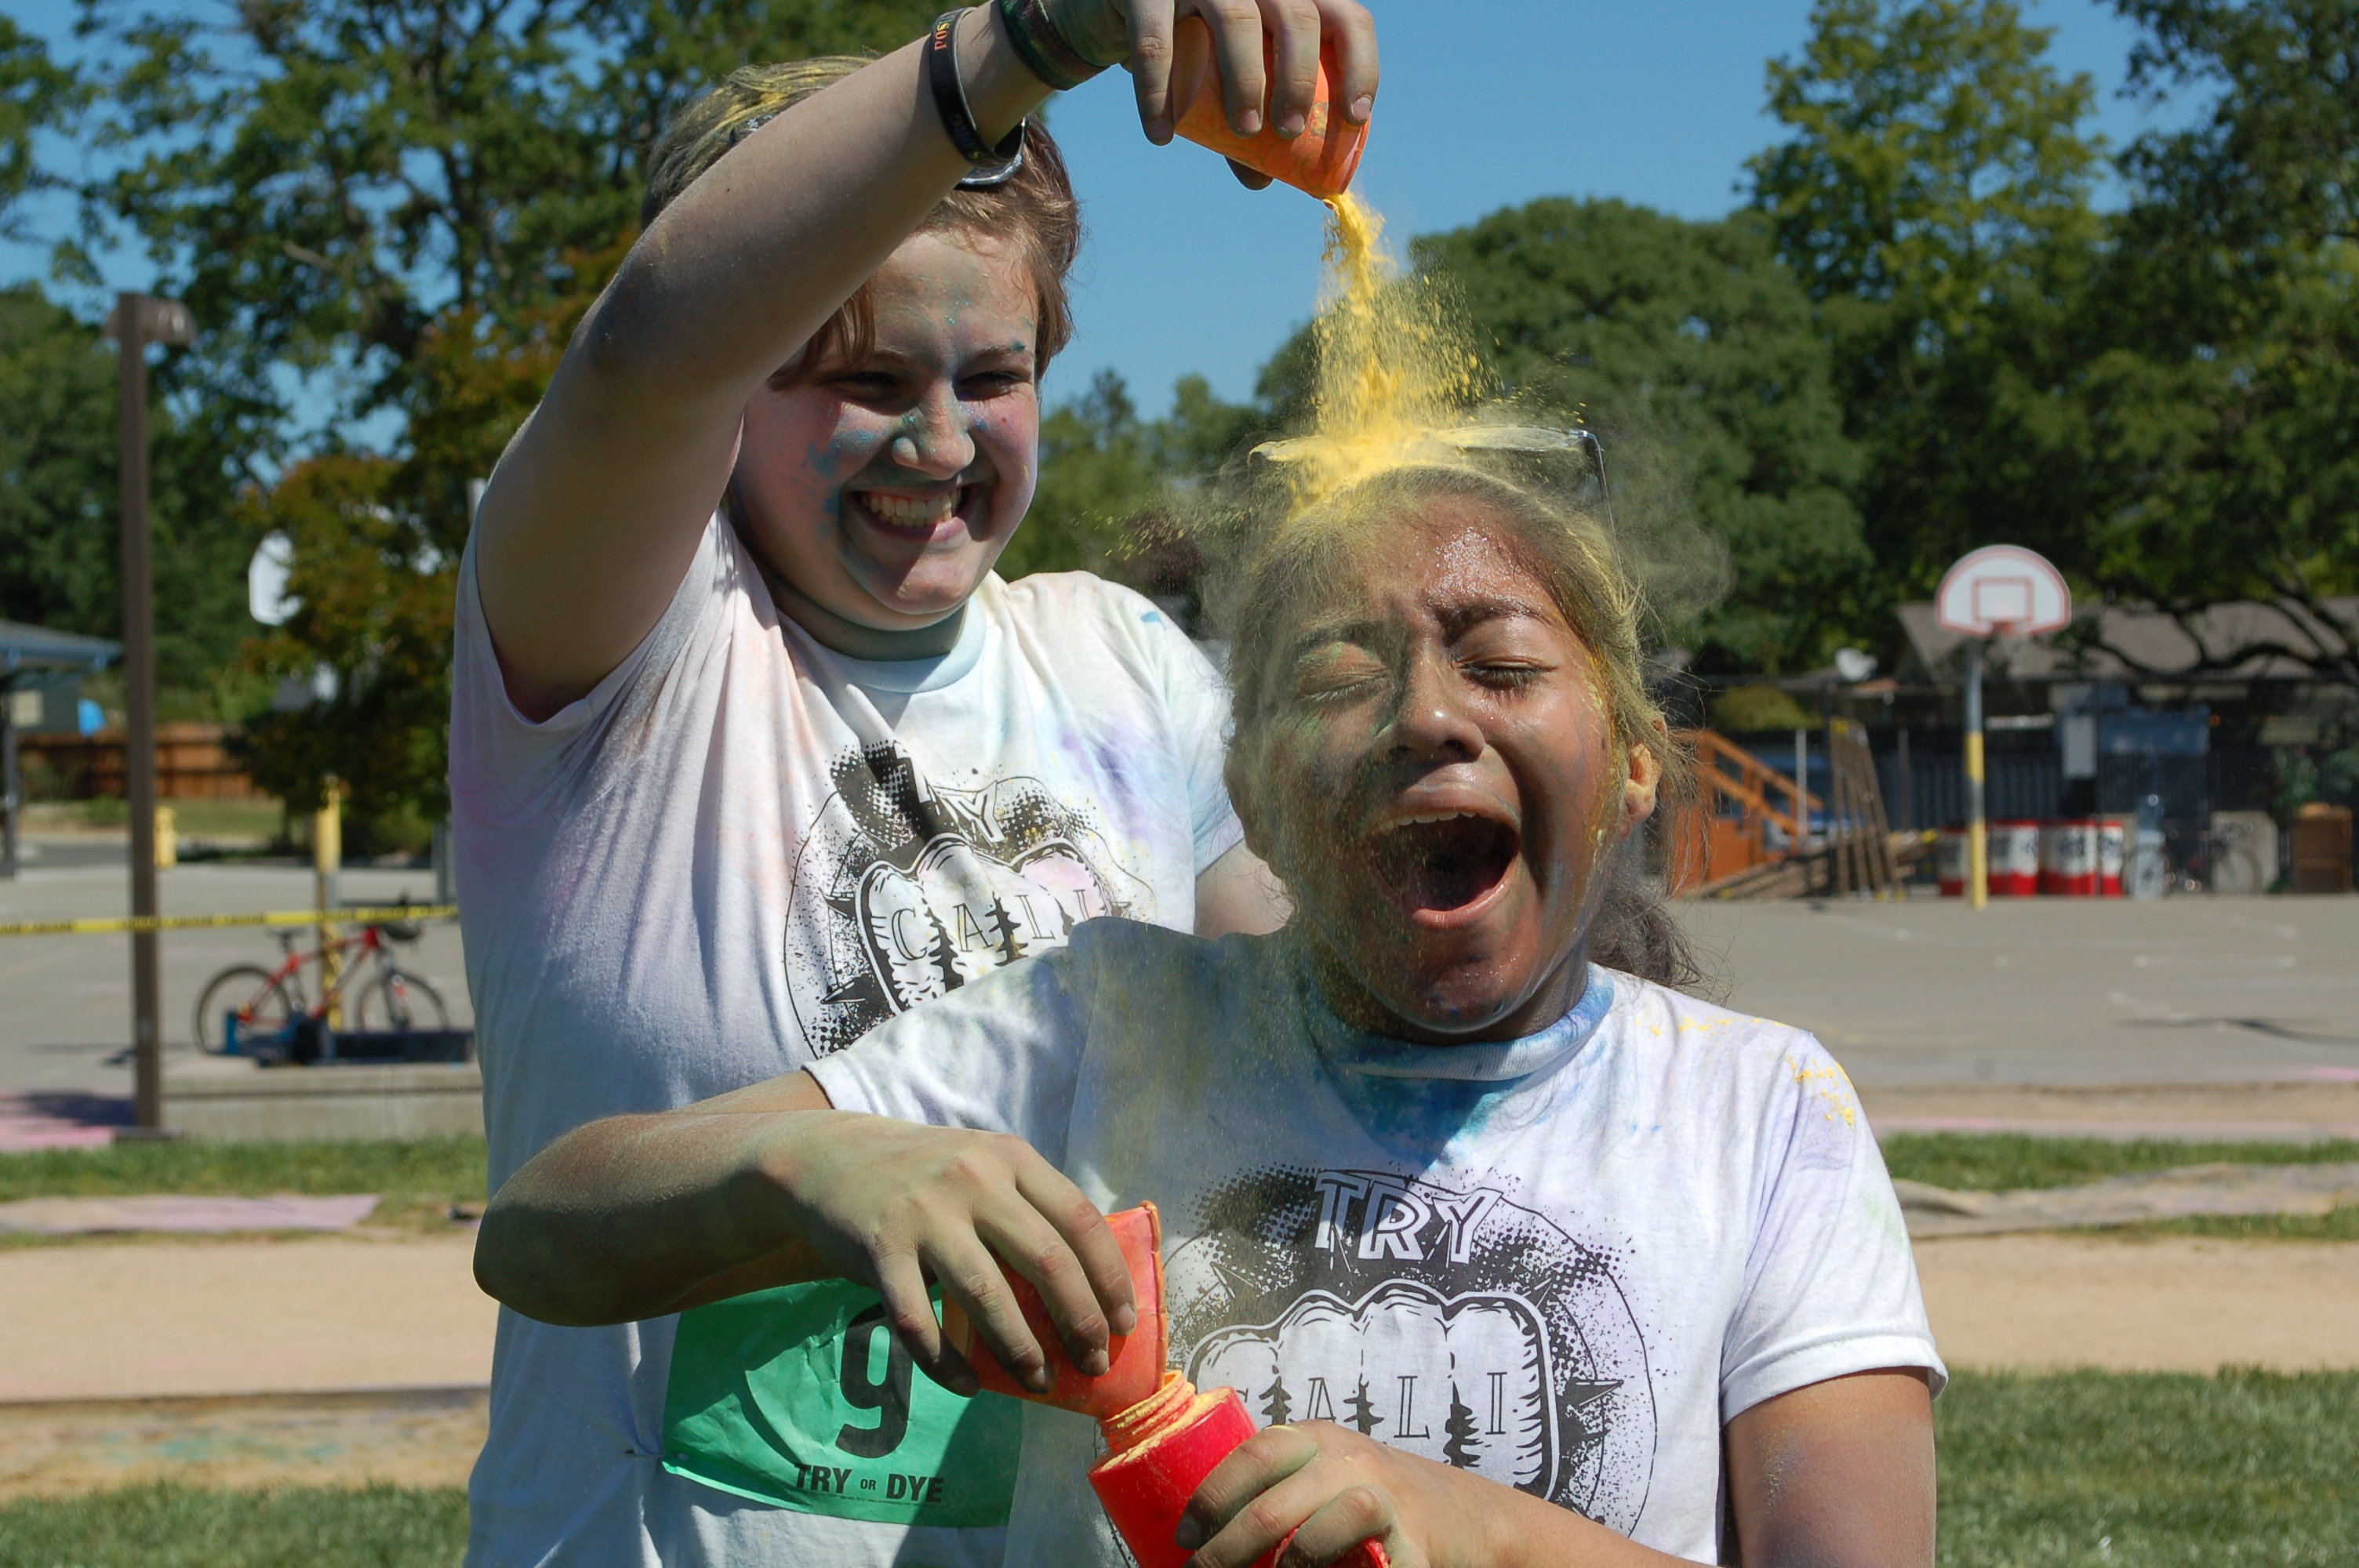 A photo of a student and a staff member playing with color powders.